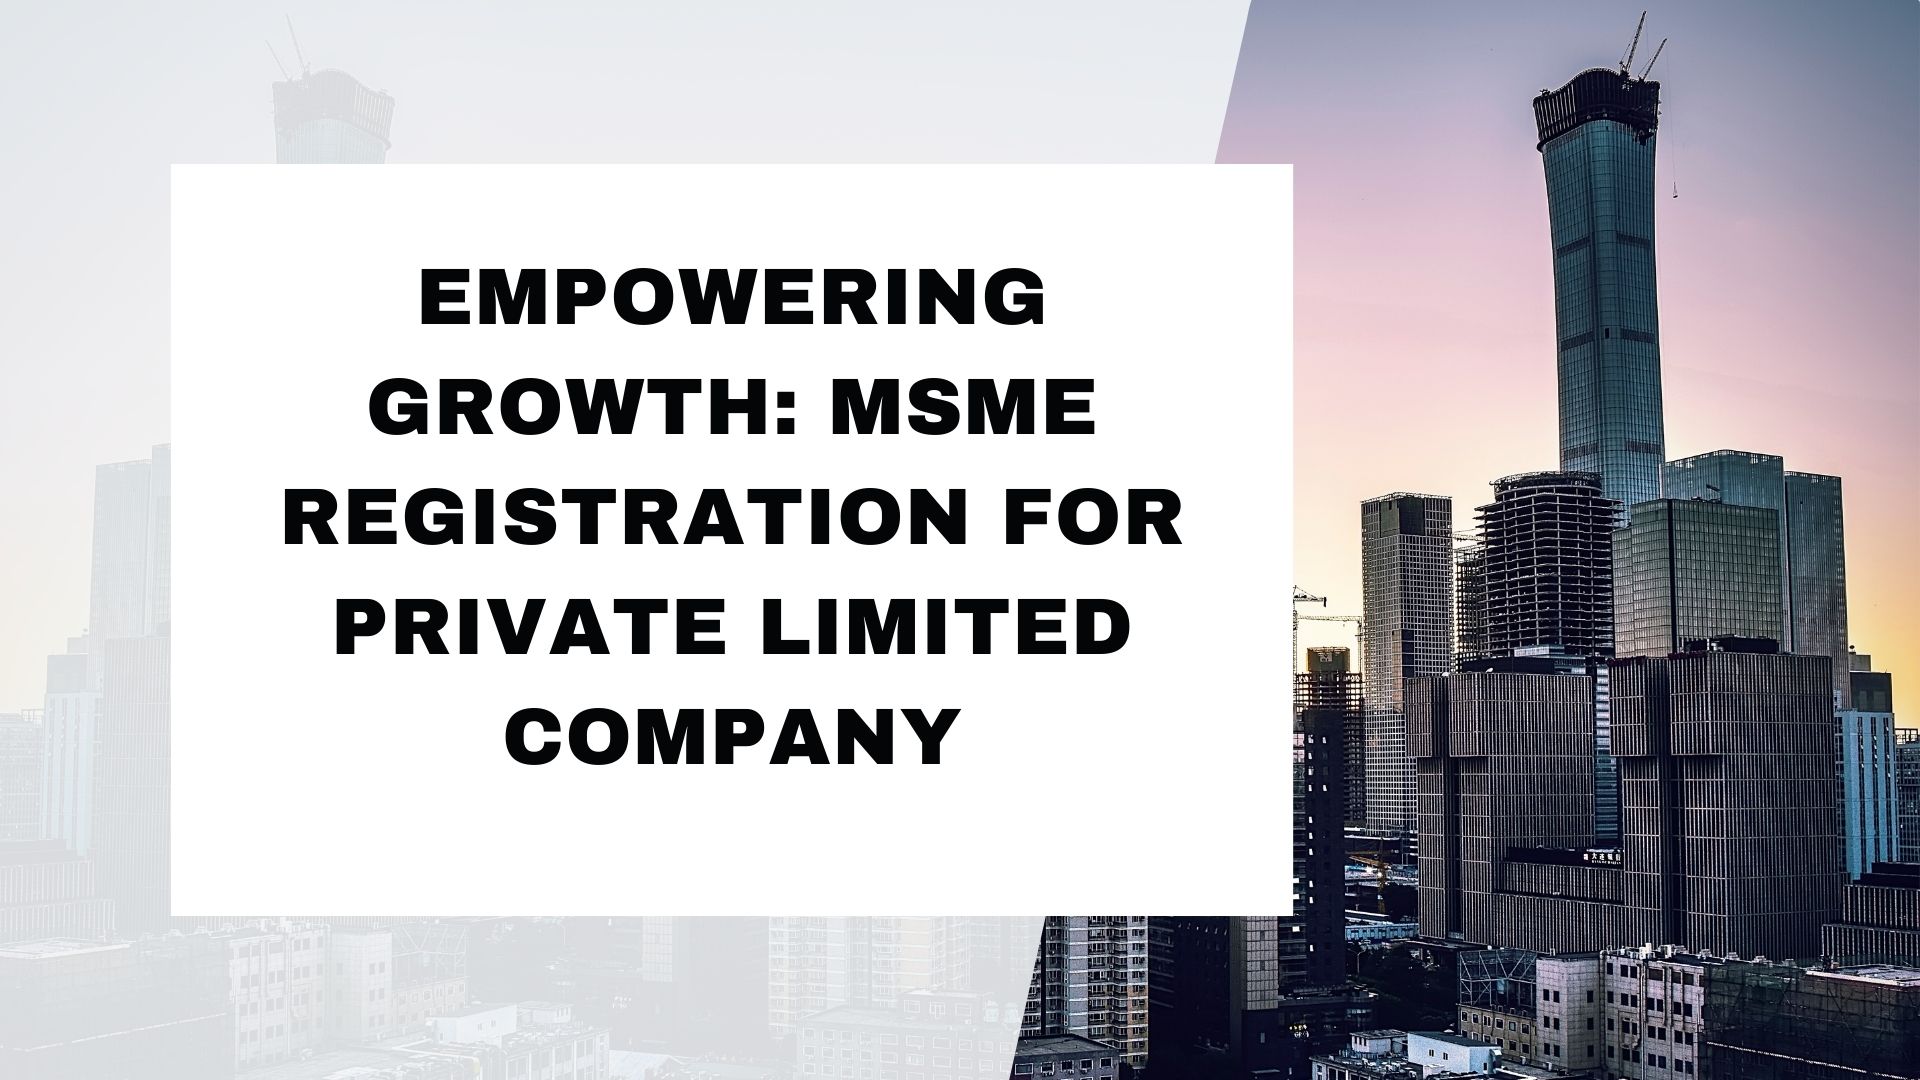 Empowering Growth MSME Registration for Private Limited Company